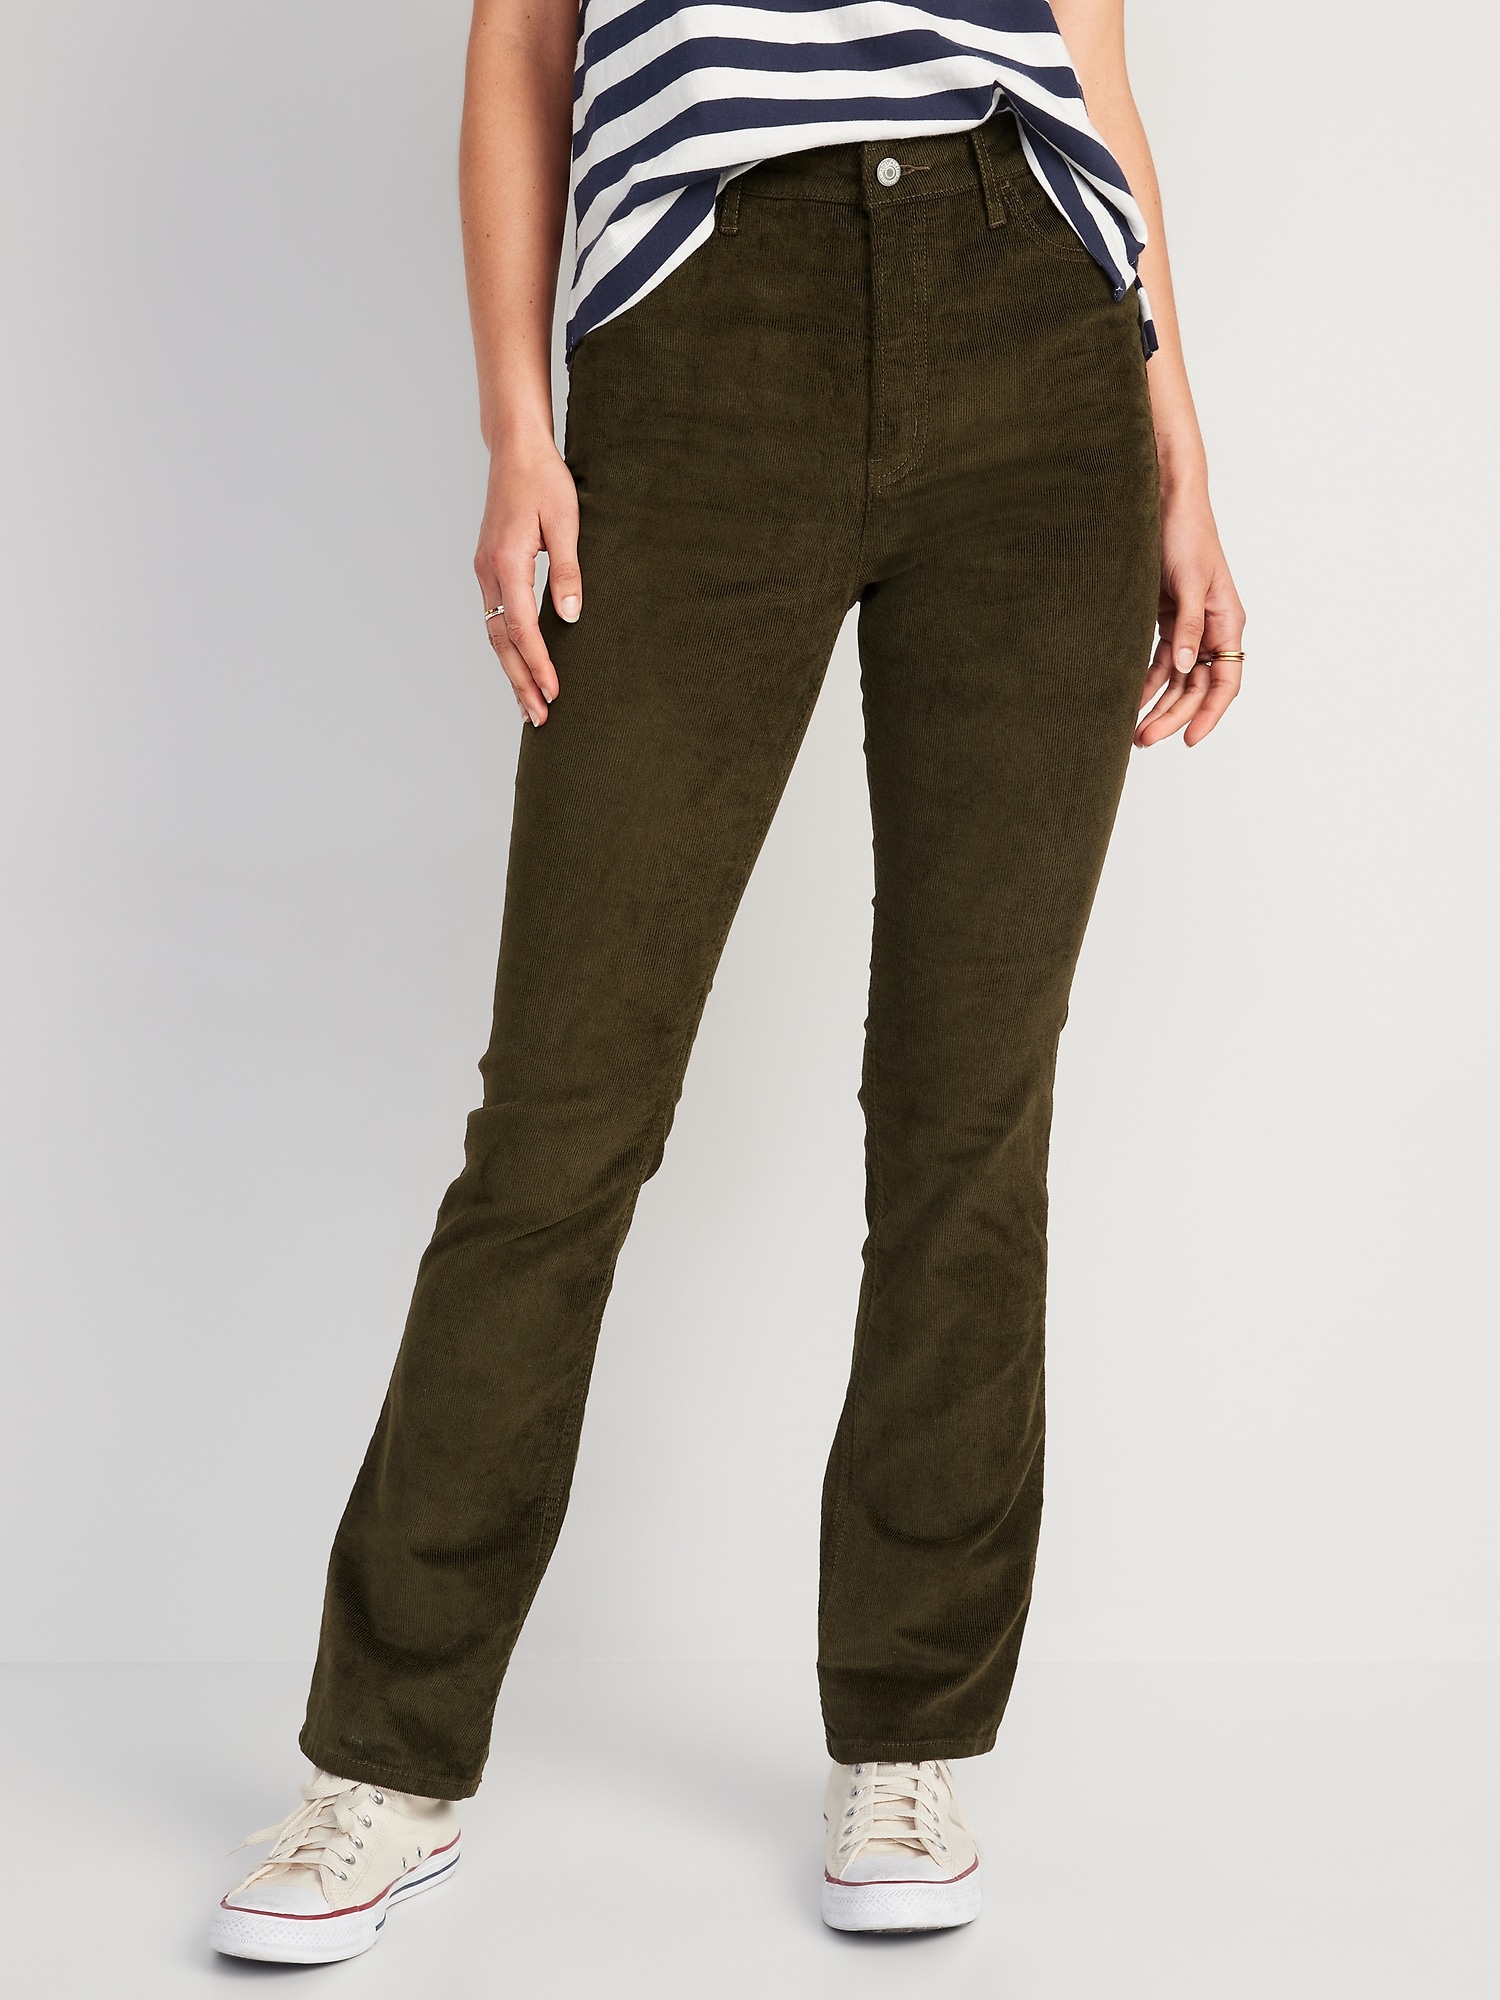 OLD NAVY New Most Popular Women's Higher High-Waisted Flare Corduroy Pants  - 12